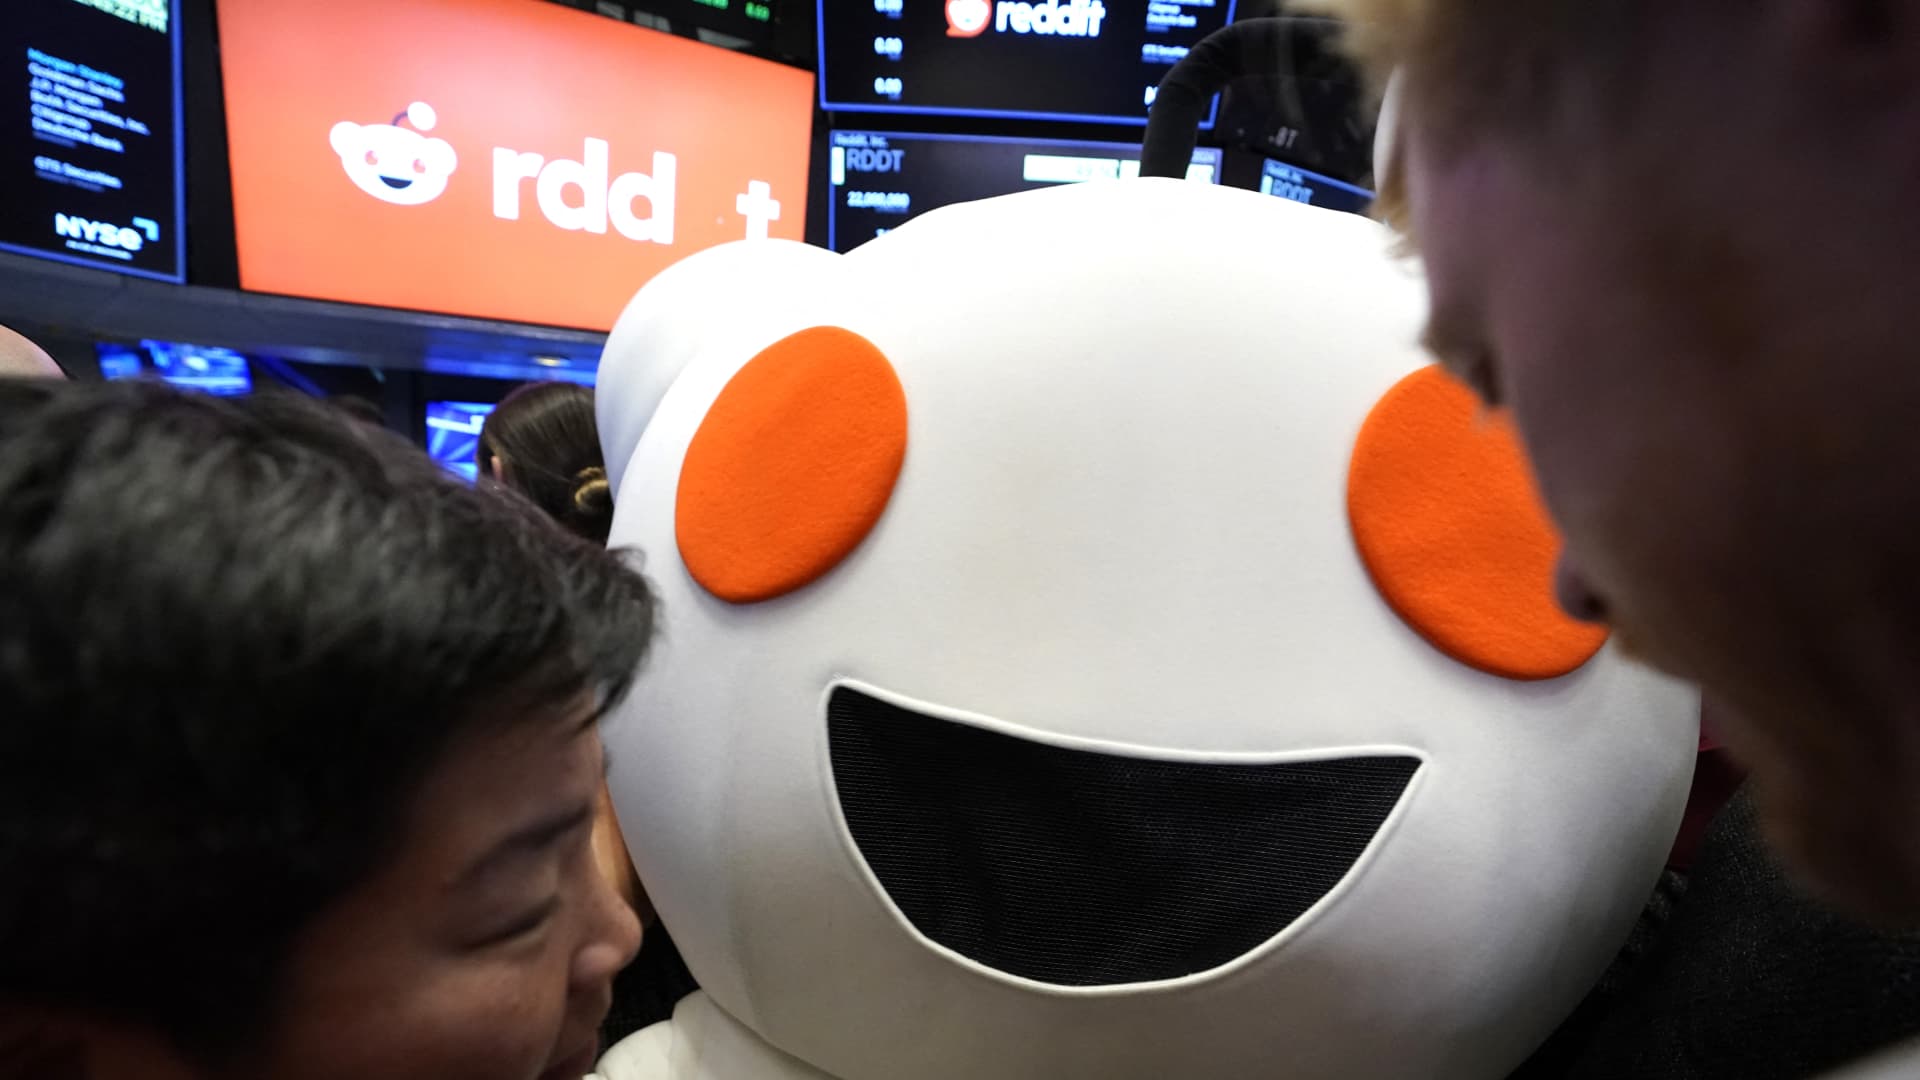 Sam Altman’s Reddit stake worth over $600 million after first day pop on NYSE